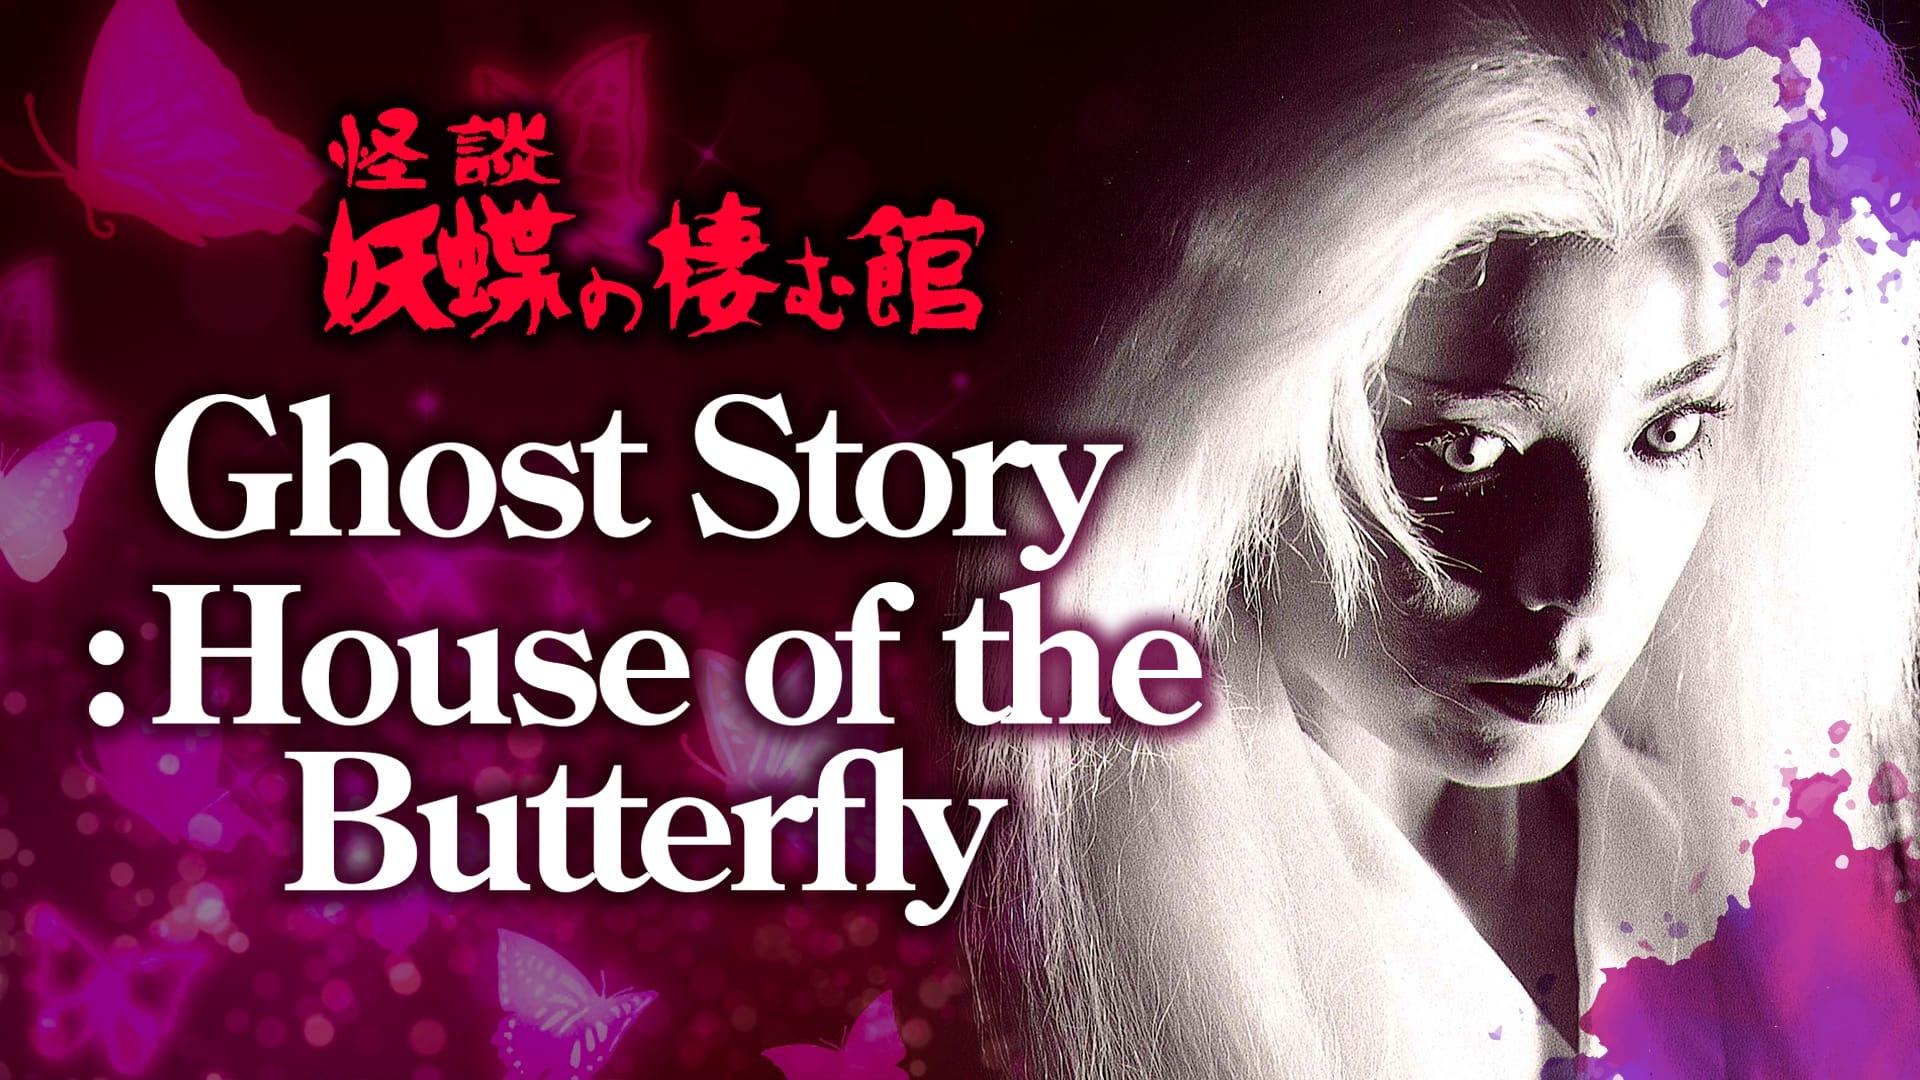 Ghost Story: The House Where Butterflies Live backdrop